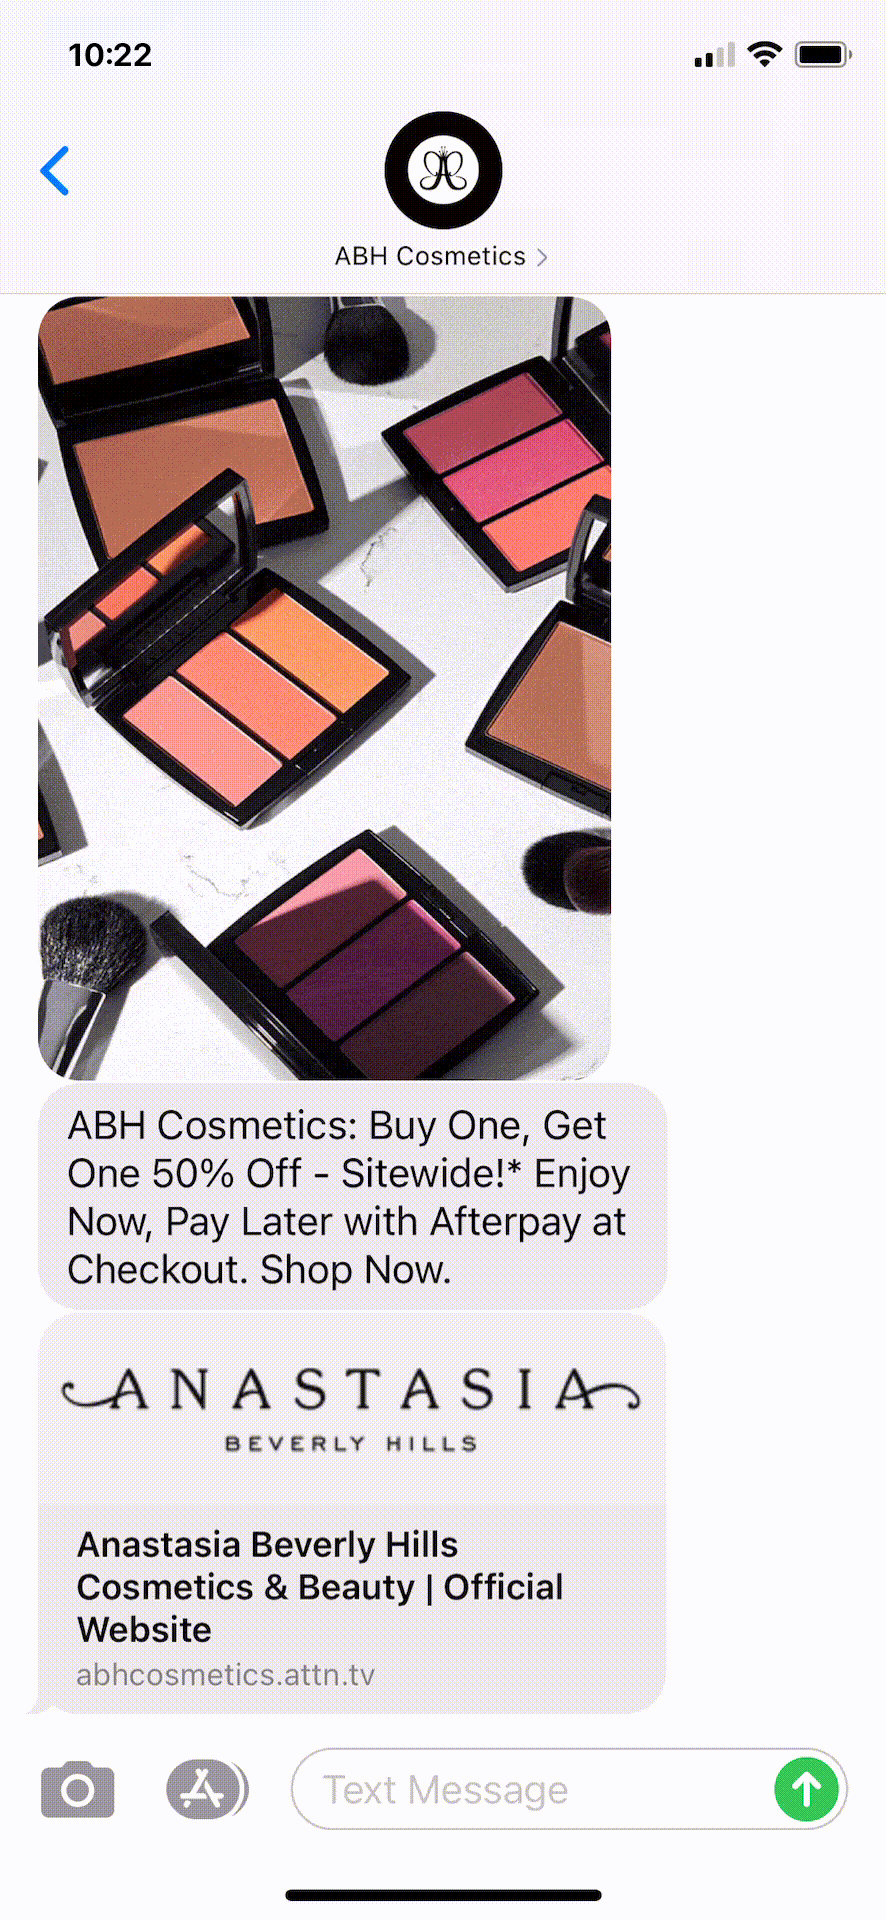 ABH-Cosmetics-Text-Message-Marketing-Example-03.18.2021